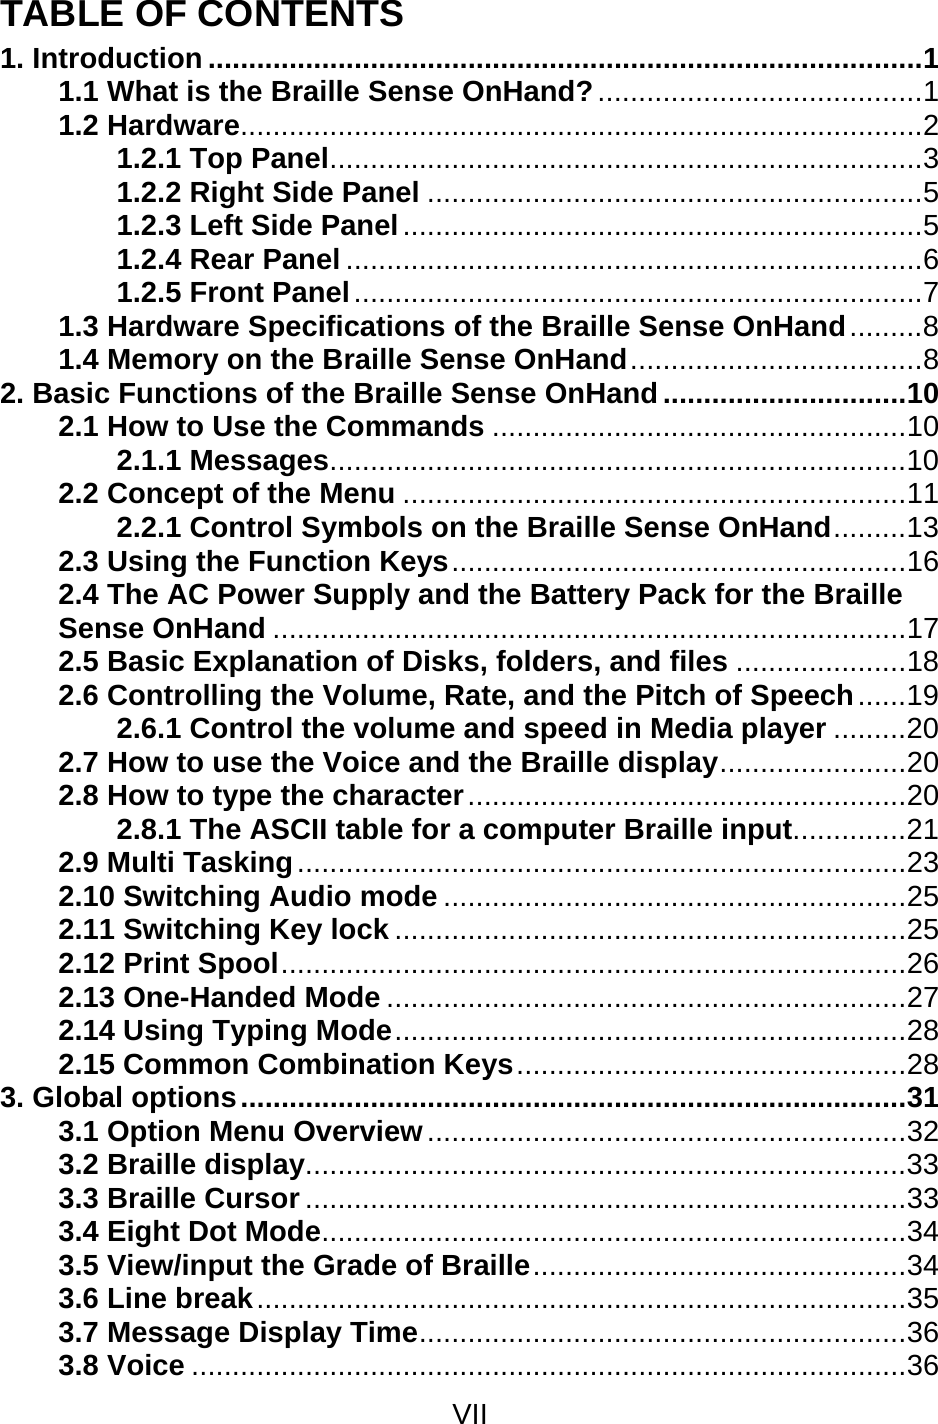 VII  TABLE OF CONTENTS 1. Introduction ........................................................................................1 1.1 What is the Braille Sense OnHand?........................................1 1.2 Hardware....................................................................................2 1.2.1 Top Panel.........................................................................3 1.2.2 Right Side Panel .............................................................5 1.2.3 Left Side Panel................................................................5 1.2.4 Rear Panel .......................................................................6 1.2.5 Front Panel......................................................................7 1.3 Hardware Specifications of the Braille Sense OnHand.........8 1.4 Memory on the Braille Sense OnHand....................................8 2. Basic Functions of the Braille Sense OnHand..............................10 2.1 How to Use the Commands ...................................................10 2.1.1 Messages.......................................................................10 2.2 Concept of the Menu ..............................................................11 2.2.1 Control Symbols on the Braille Sense OnHand.........13 2.3 Using the Function Keys........................................................16 2.4 The AC Power Supply and the Battery Pack for the Braille Sense OnHand ..............................................................................17 2.5 Basic Explanation of Disks, folders, and files .....................18 2.6 Controlling the Volume, Rate, and the Pitch of Speech......19 2.6.1 Control the volume and speed in Media player .........20 2.7 How to use the Voice and the Braille display.......................20 2.8 How to type the character......................................................20 2.8.1 The ASCII table for a computer Braille input..............21 2.9 Multi Tasking...........................................................................23 2.10 Switching Audio mode .........................................................25 2.11 Switching Key lock ...............................................................25 2.12 Print Spool.............................................................................26 2.13 One-Handed Mode ................................................................27 2.14 Using Typing Mode...............................................................28 2.15 Common Combination Keys................................................28 3. Global options..................................................................................31 3.1 Option Menu Overview...........................................................32 3.2 Braille display..........................................................................33 3.3 Braille Cursor ..........................................................................33 3.4 Eight Dot Mode........................................................................34 3.5 View/input the Grade of Braille..............................................34 3.6 Line break................................................................................35 3.7 Message Display Time............................................................36 3.8 Voice ........................................................................................36 